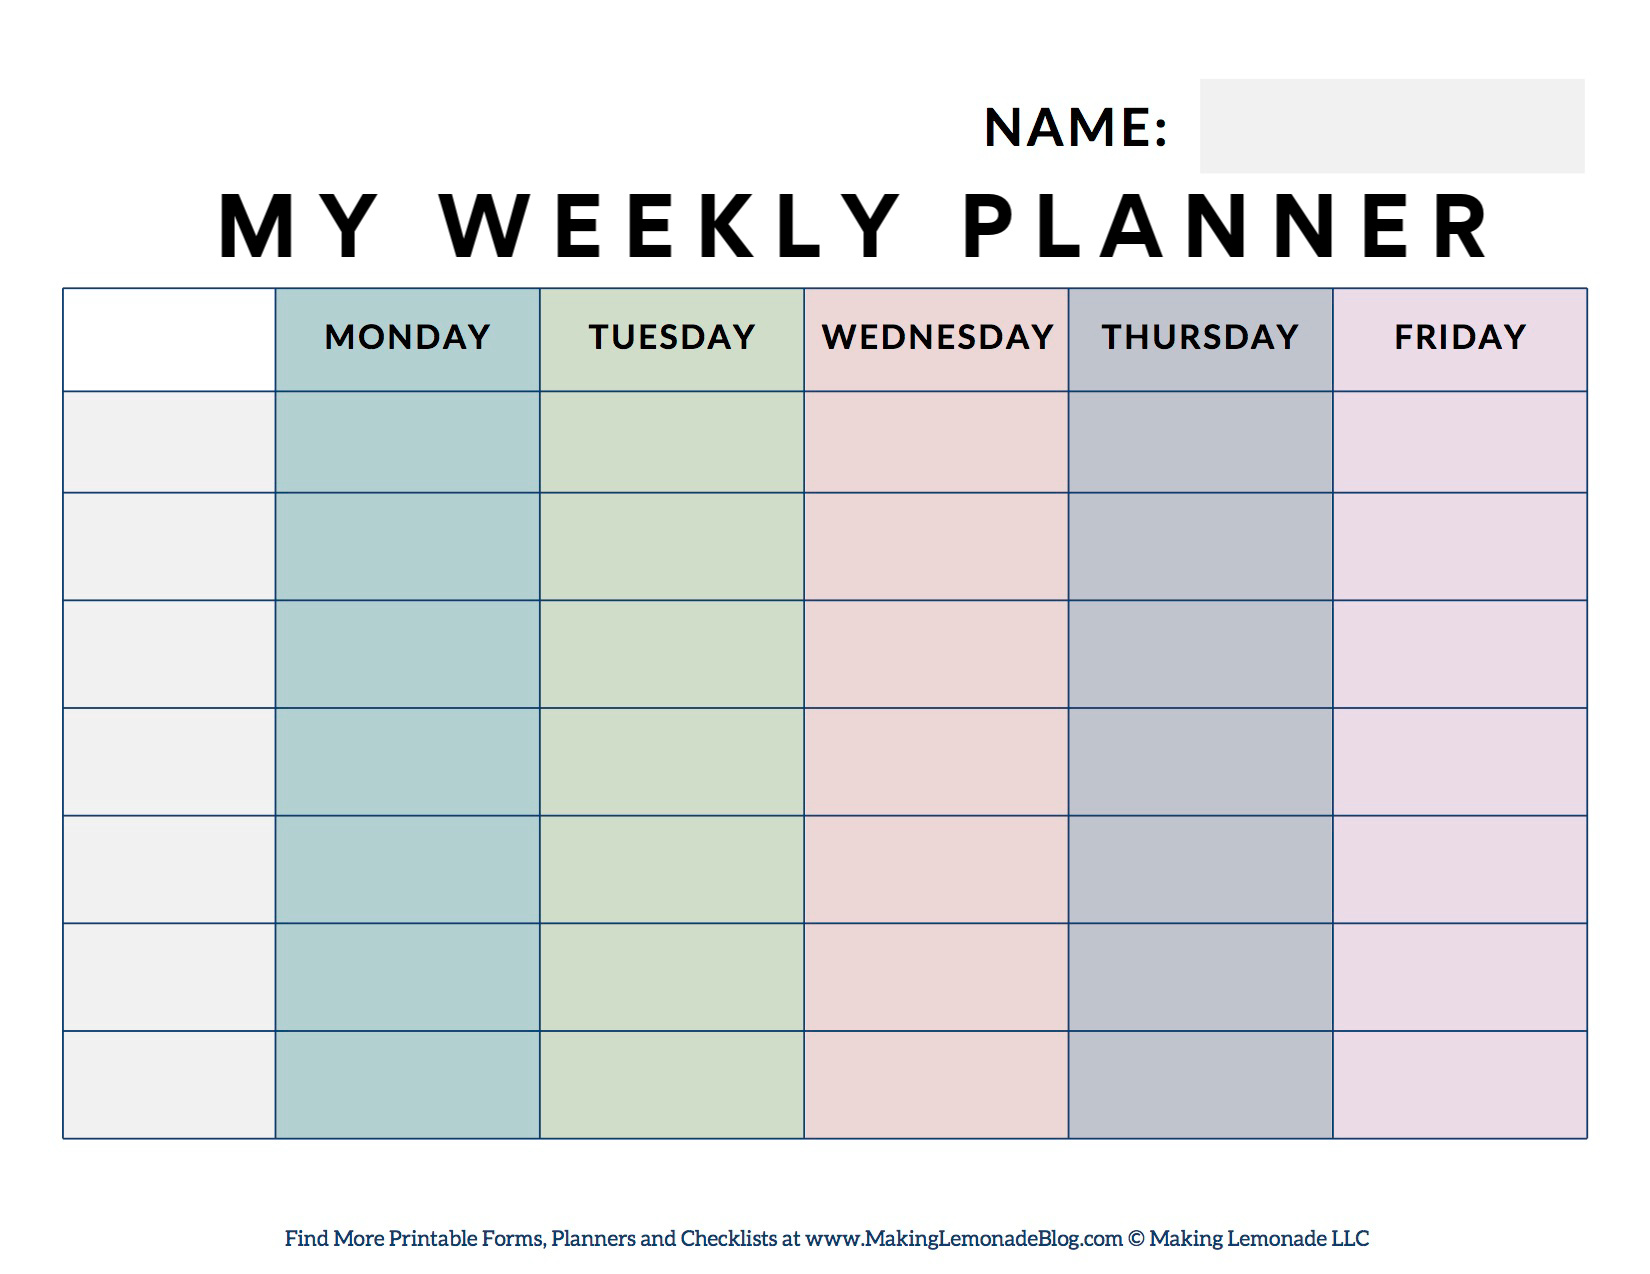 student weekly planner by subject